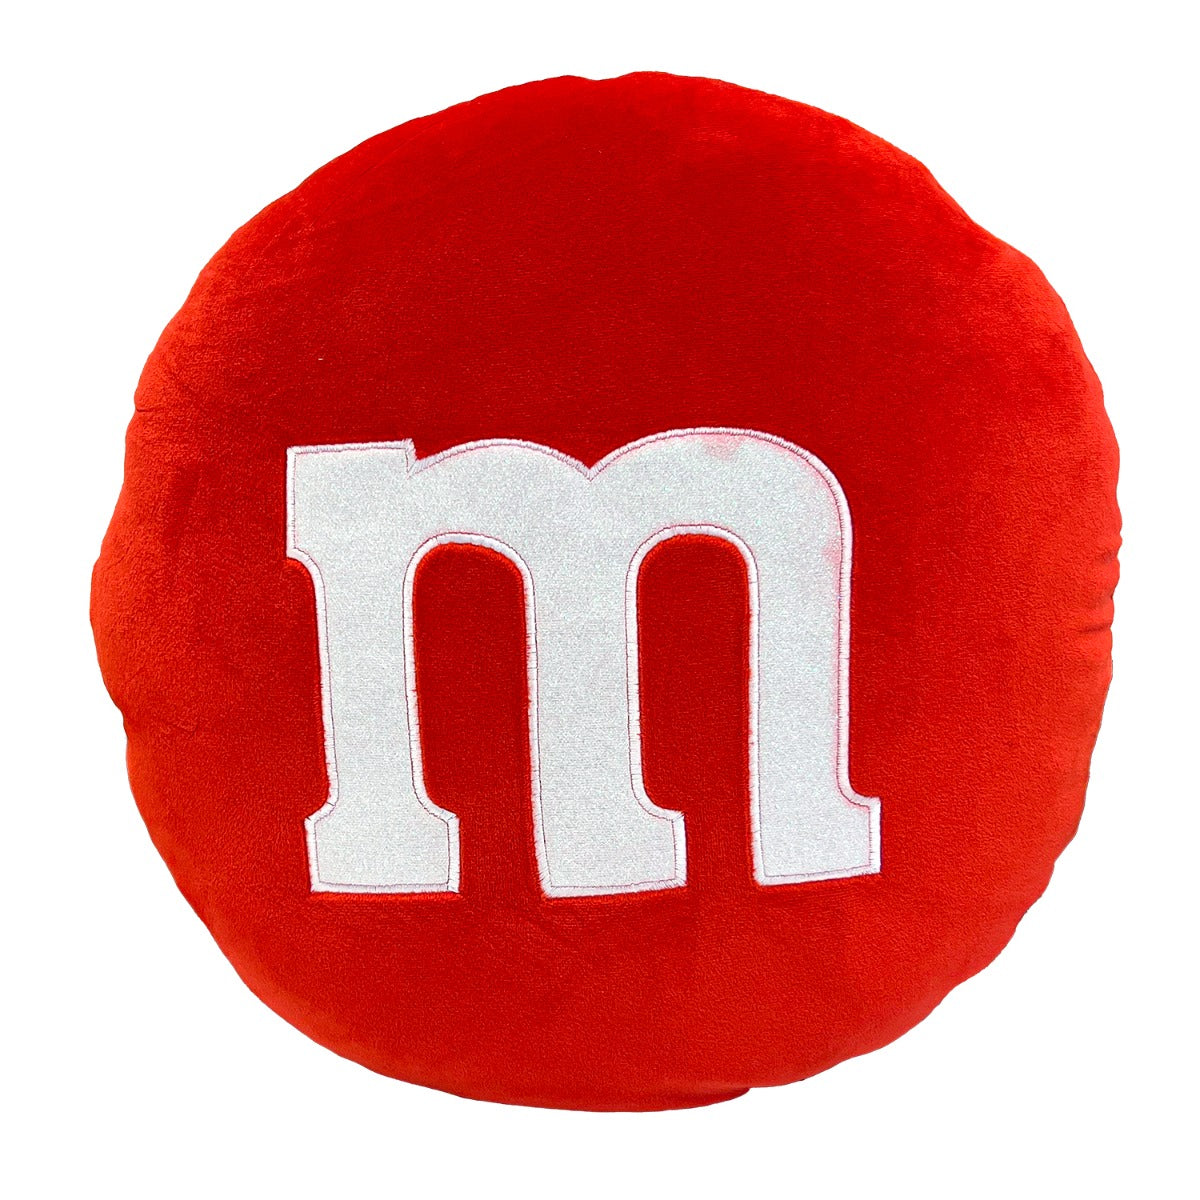 M&M's Candy Plush Character - Red